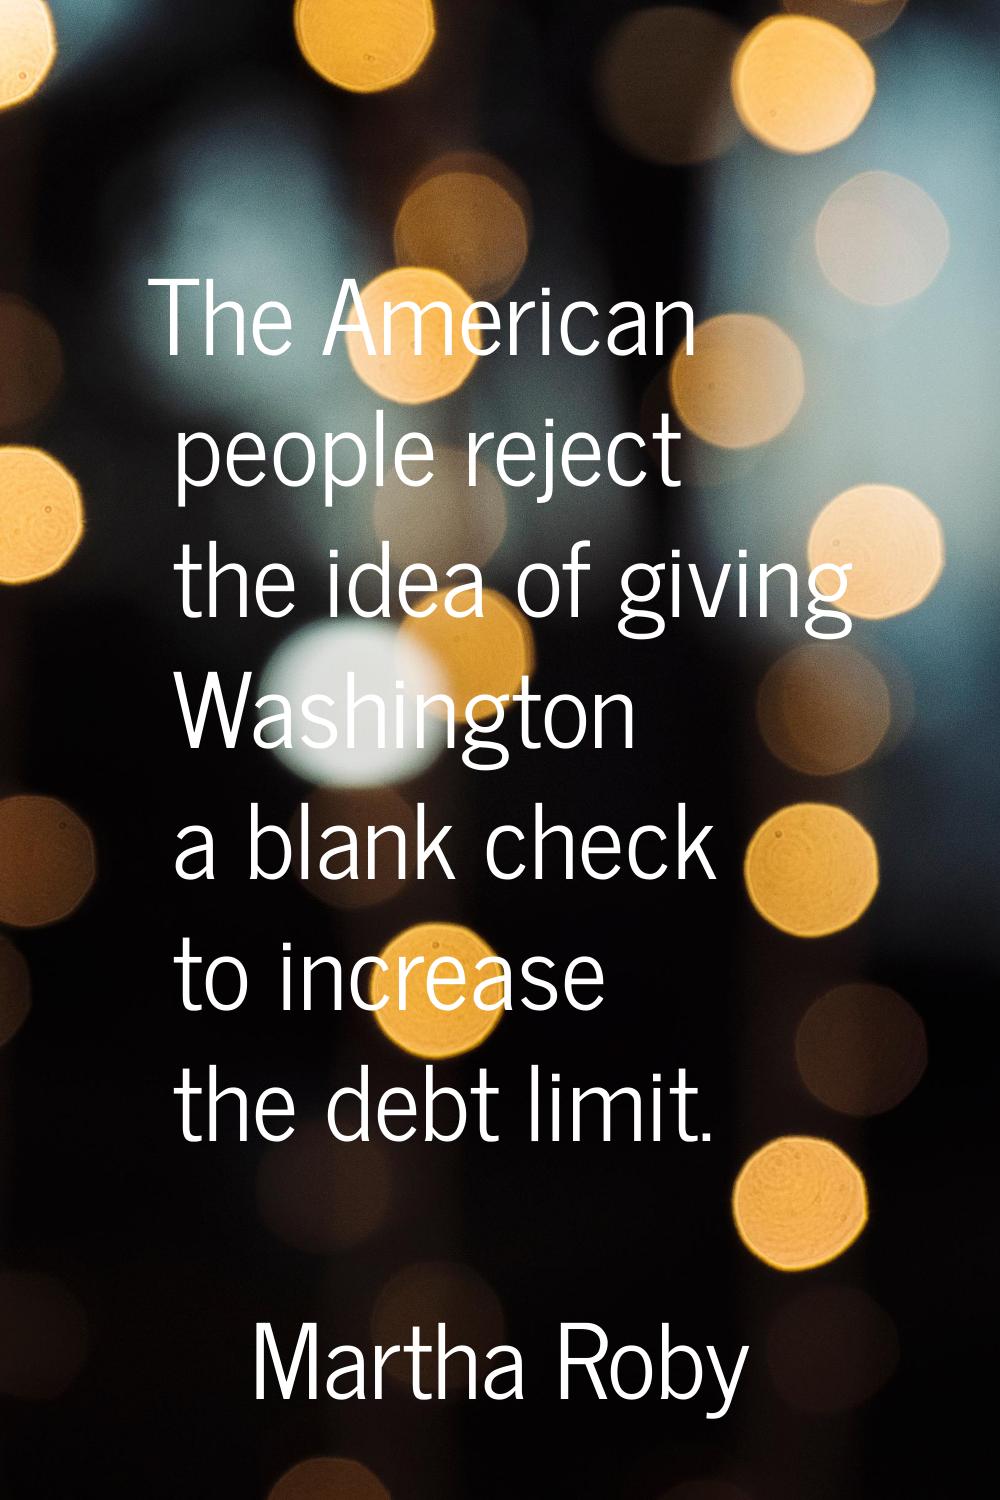 The American people reject the idea of giving Washington a blank check to increase the debt limit.